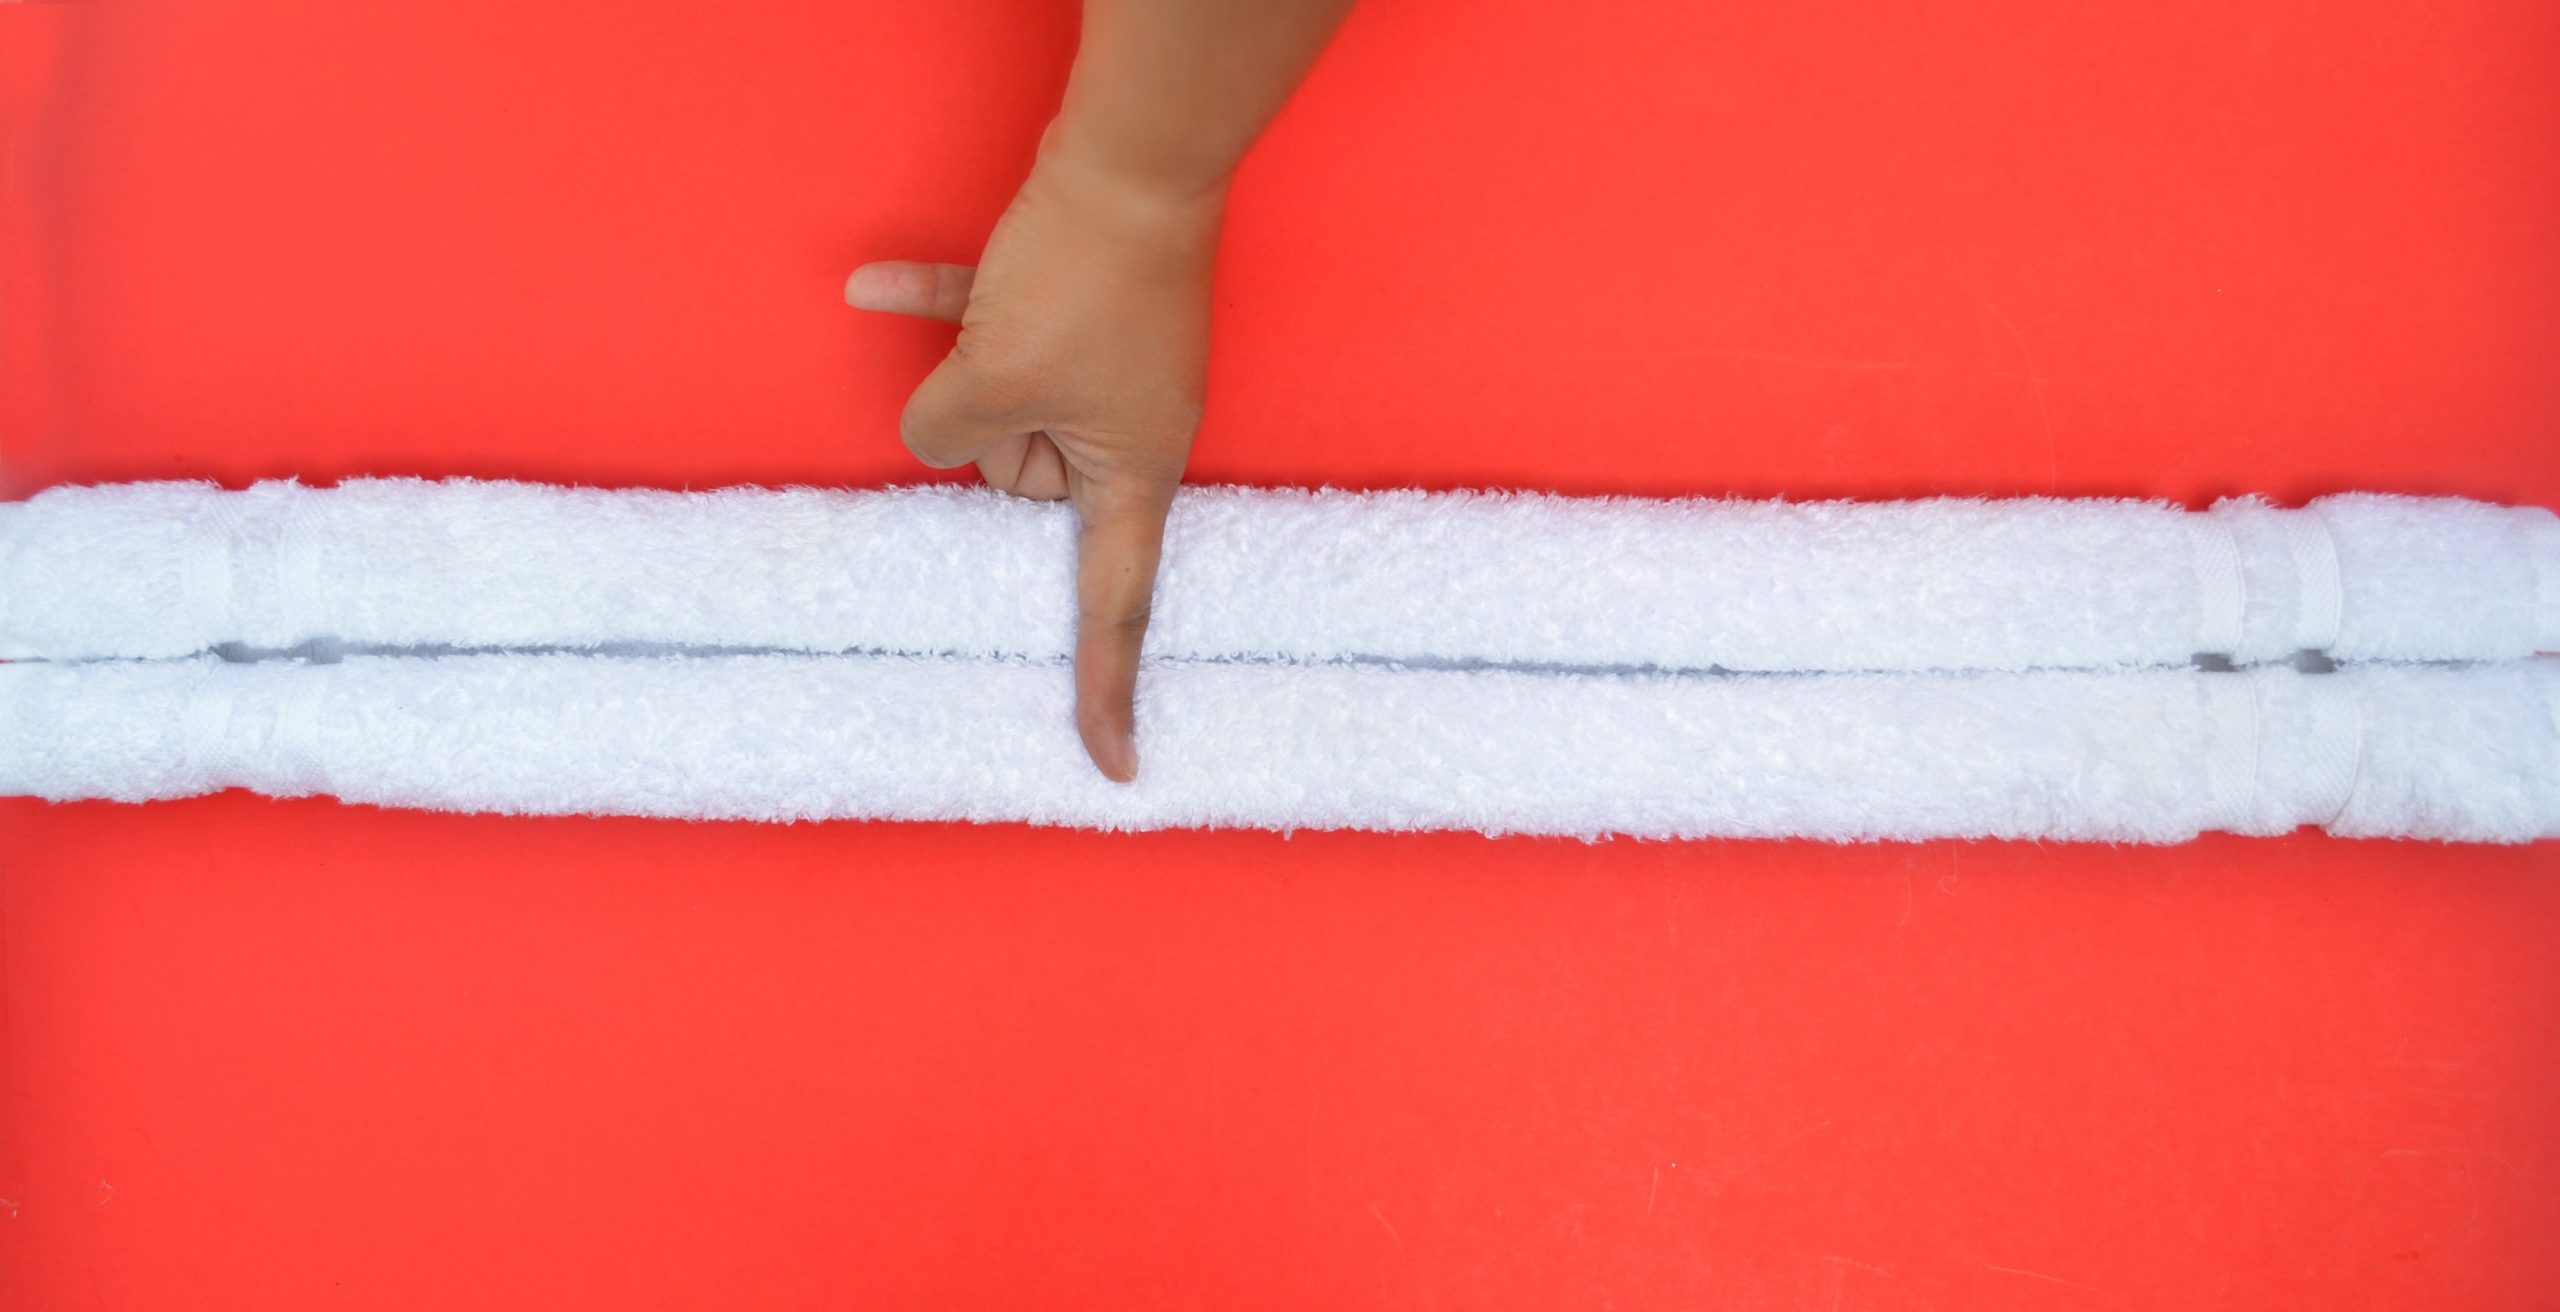 finger on the middle of a rolled towel on a red background